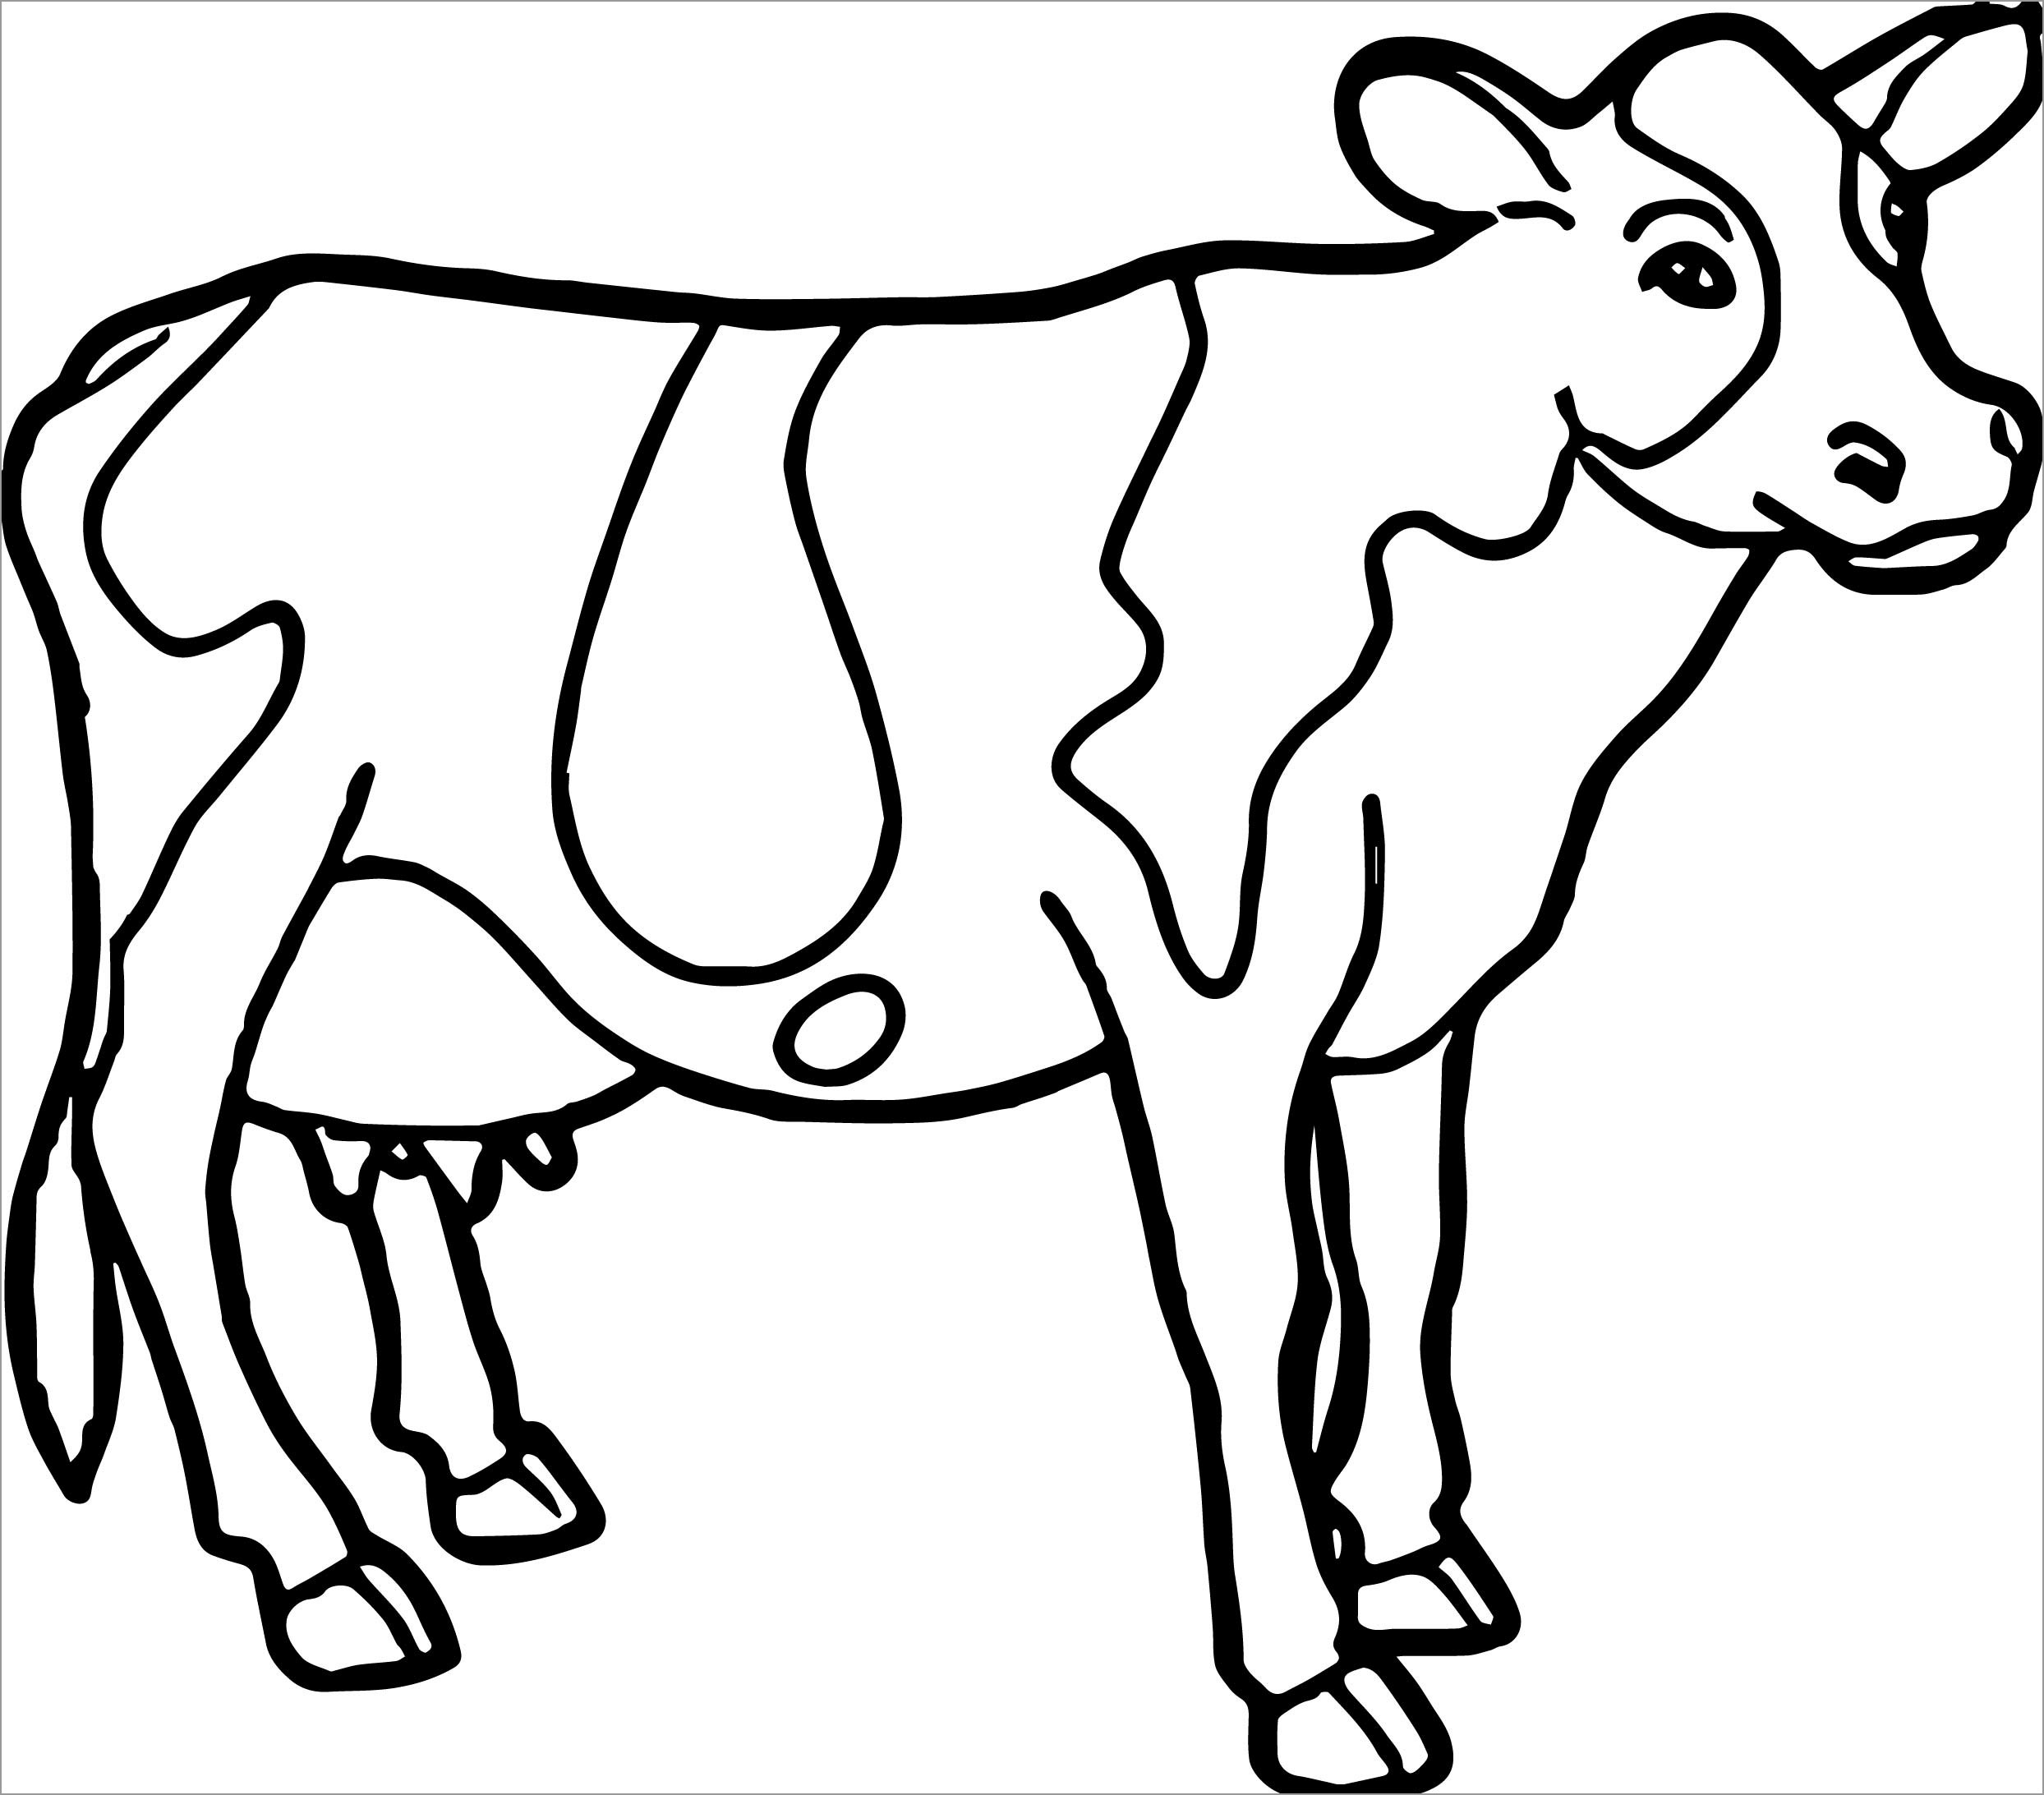 Cattle Coloring Pages - ColoringBay